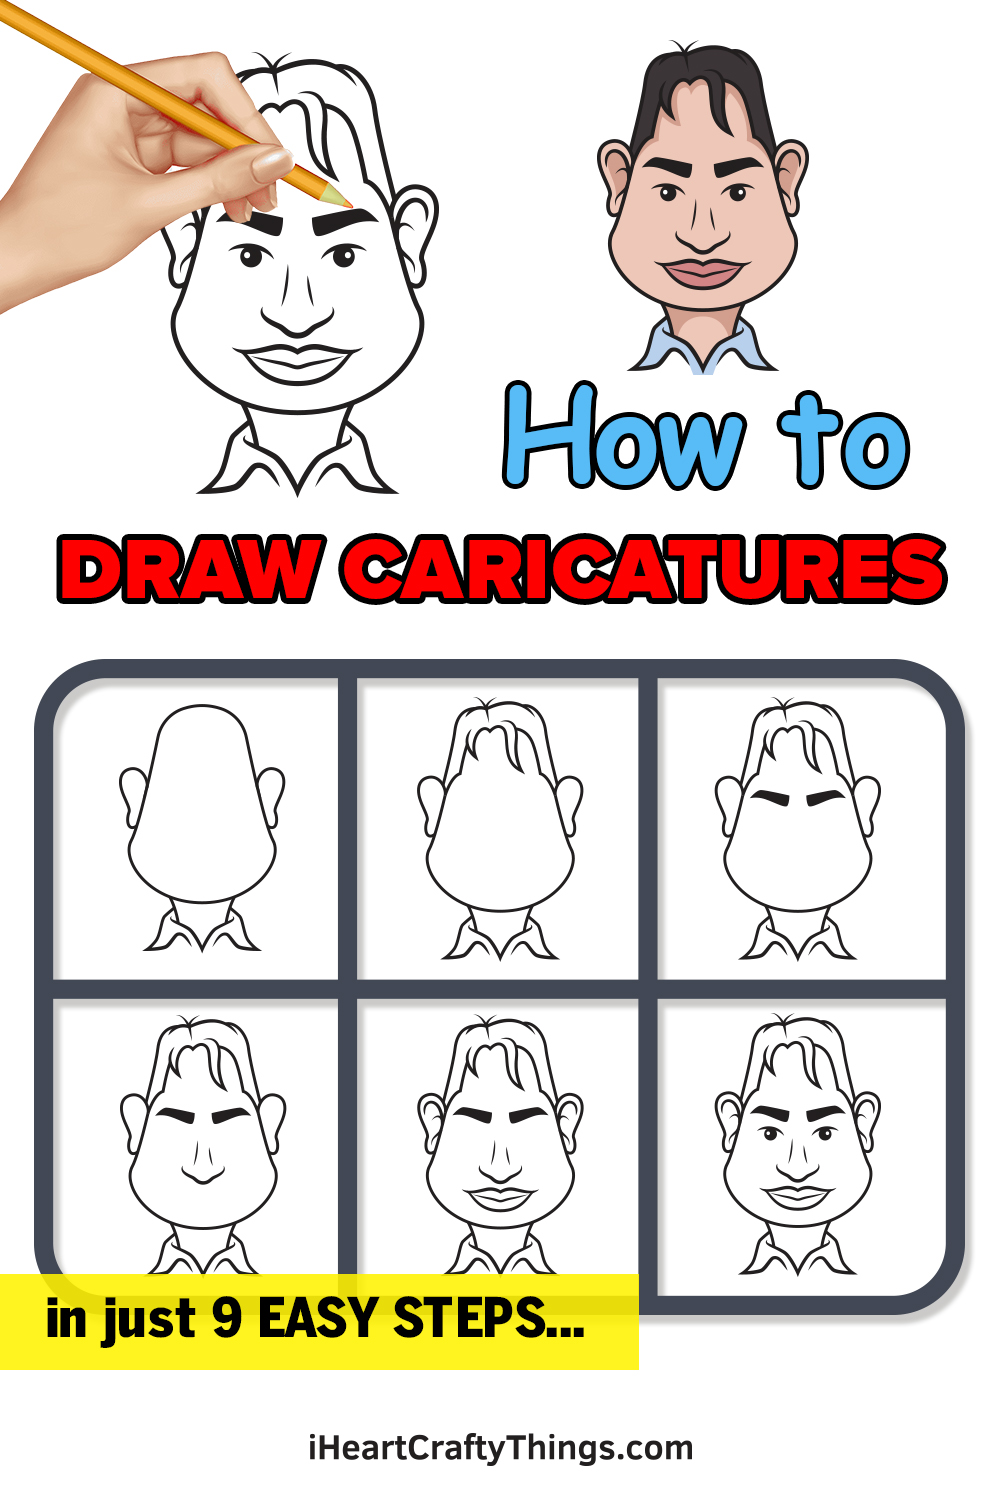 how to draw caricatures in 9 easy steps